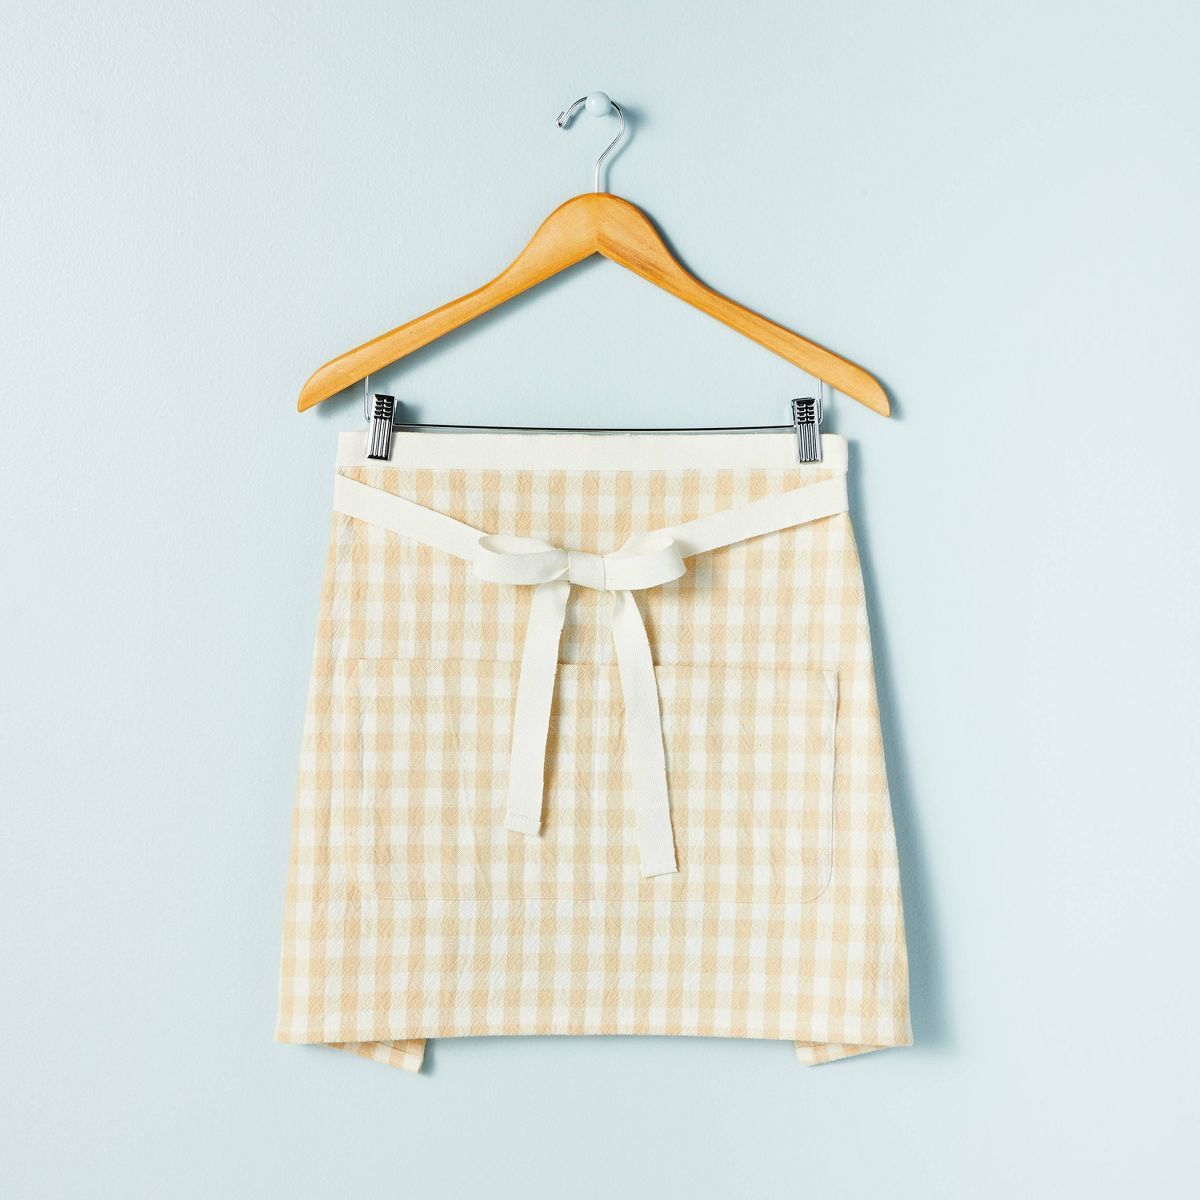 Gingham Woven Waist Apron Ivory/Cream - Hearth & Hand™ with Magnolia | Target